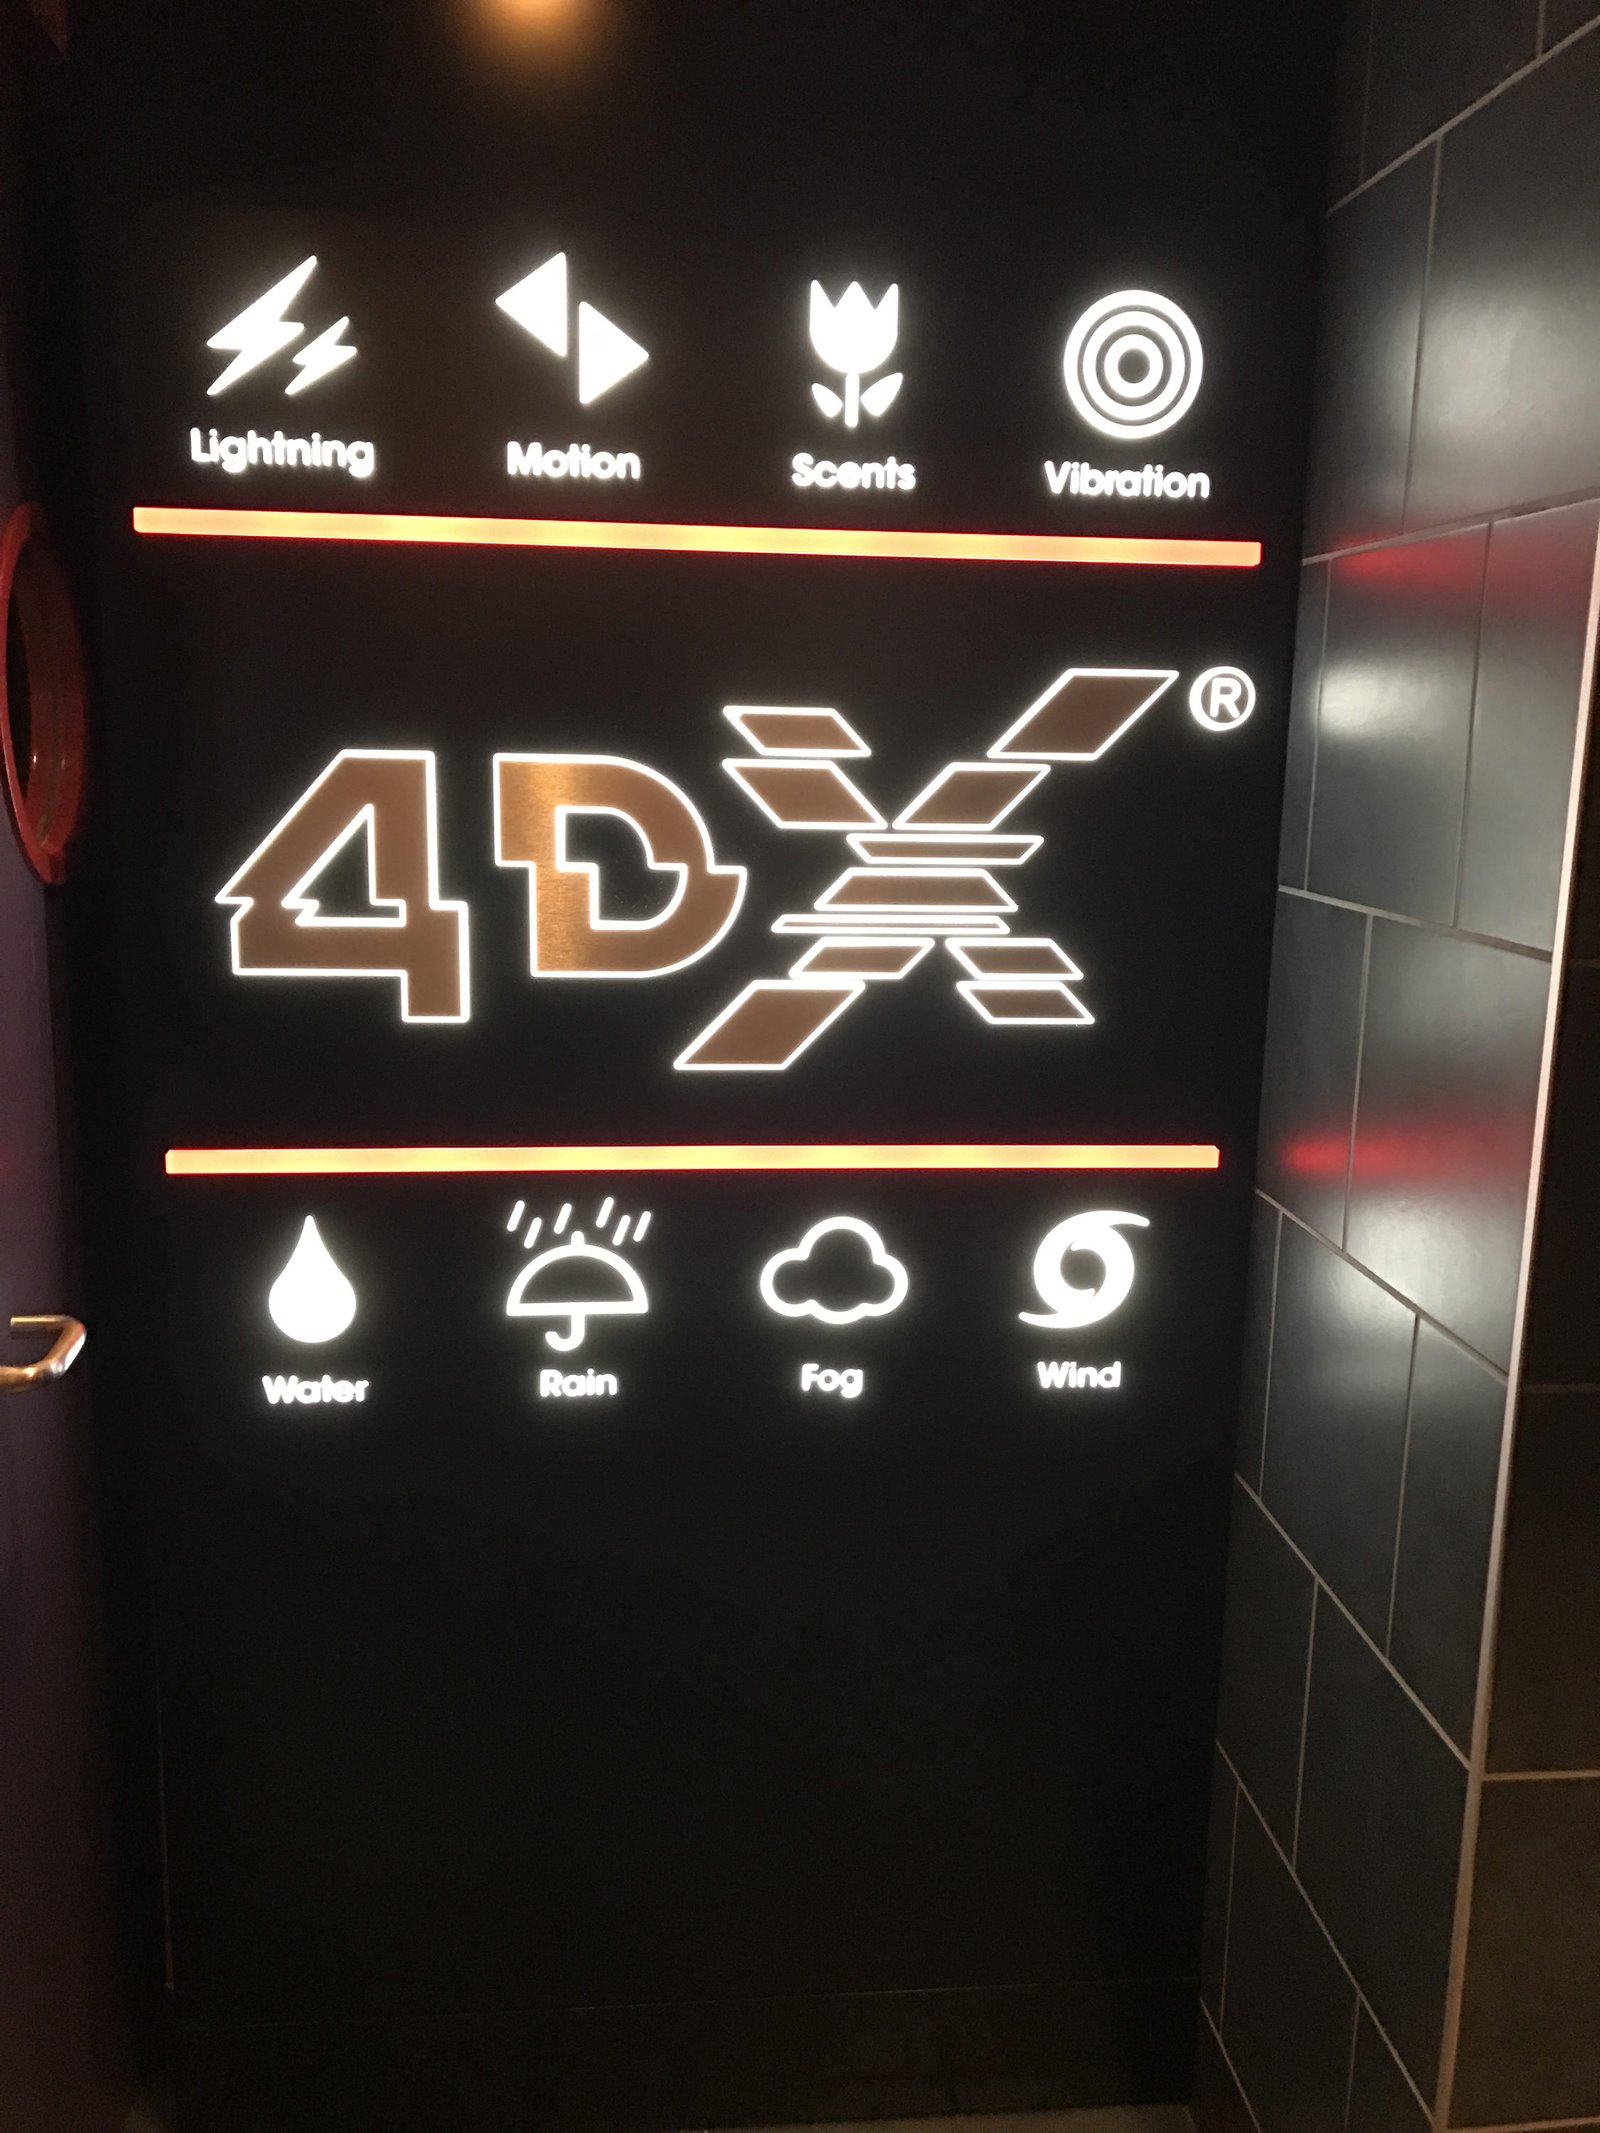 The 4DX Experience